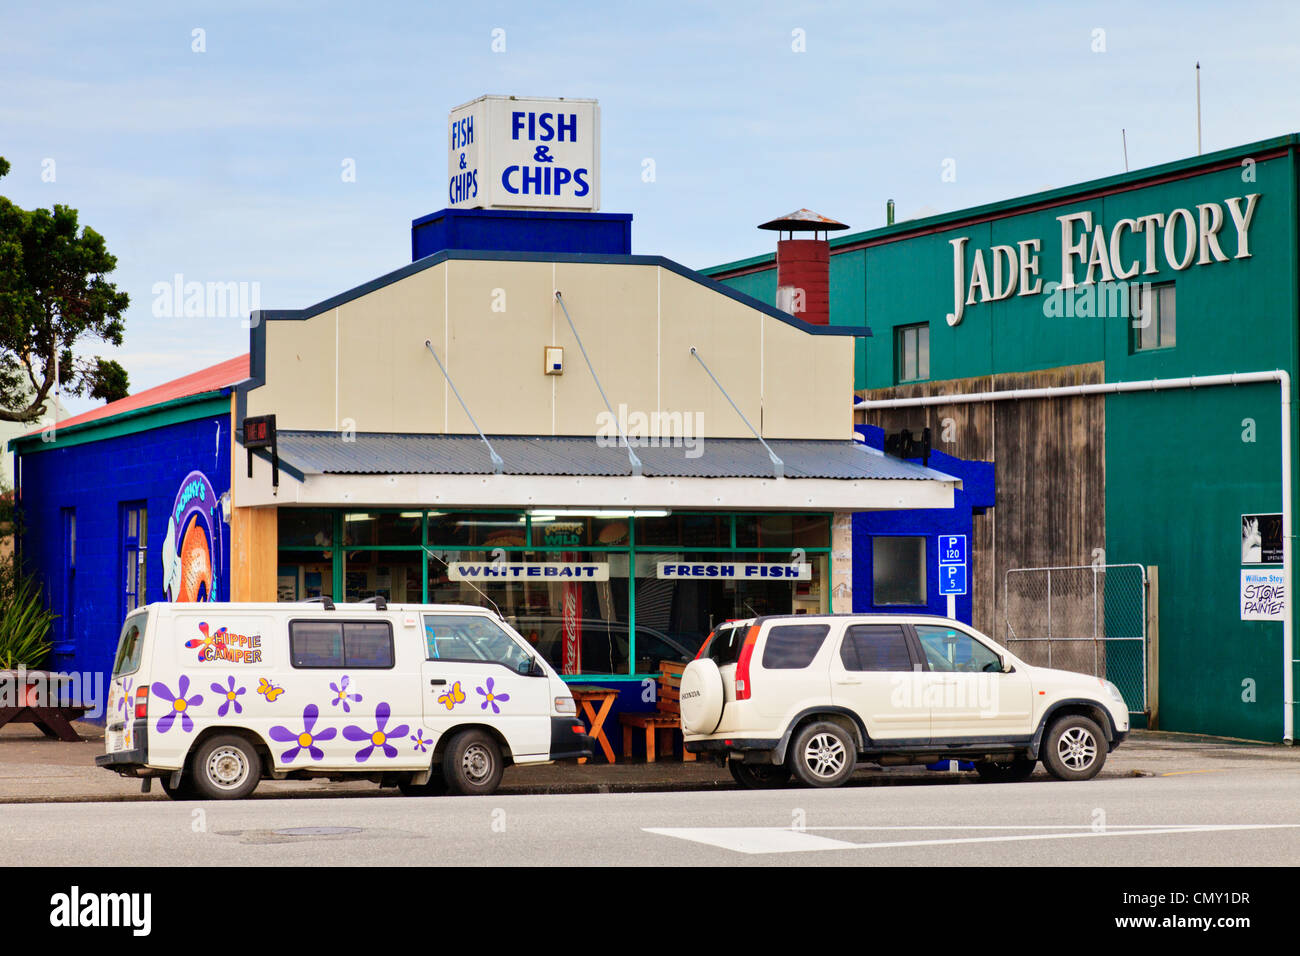 A fish and chip shop selling whitebait and fresh fish in Hokitika,West Coast, New Zealand Stock Photo